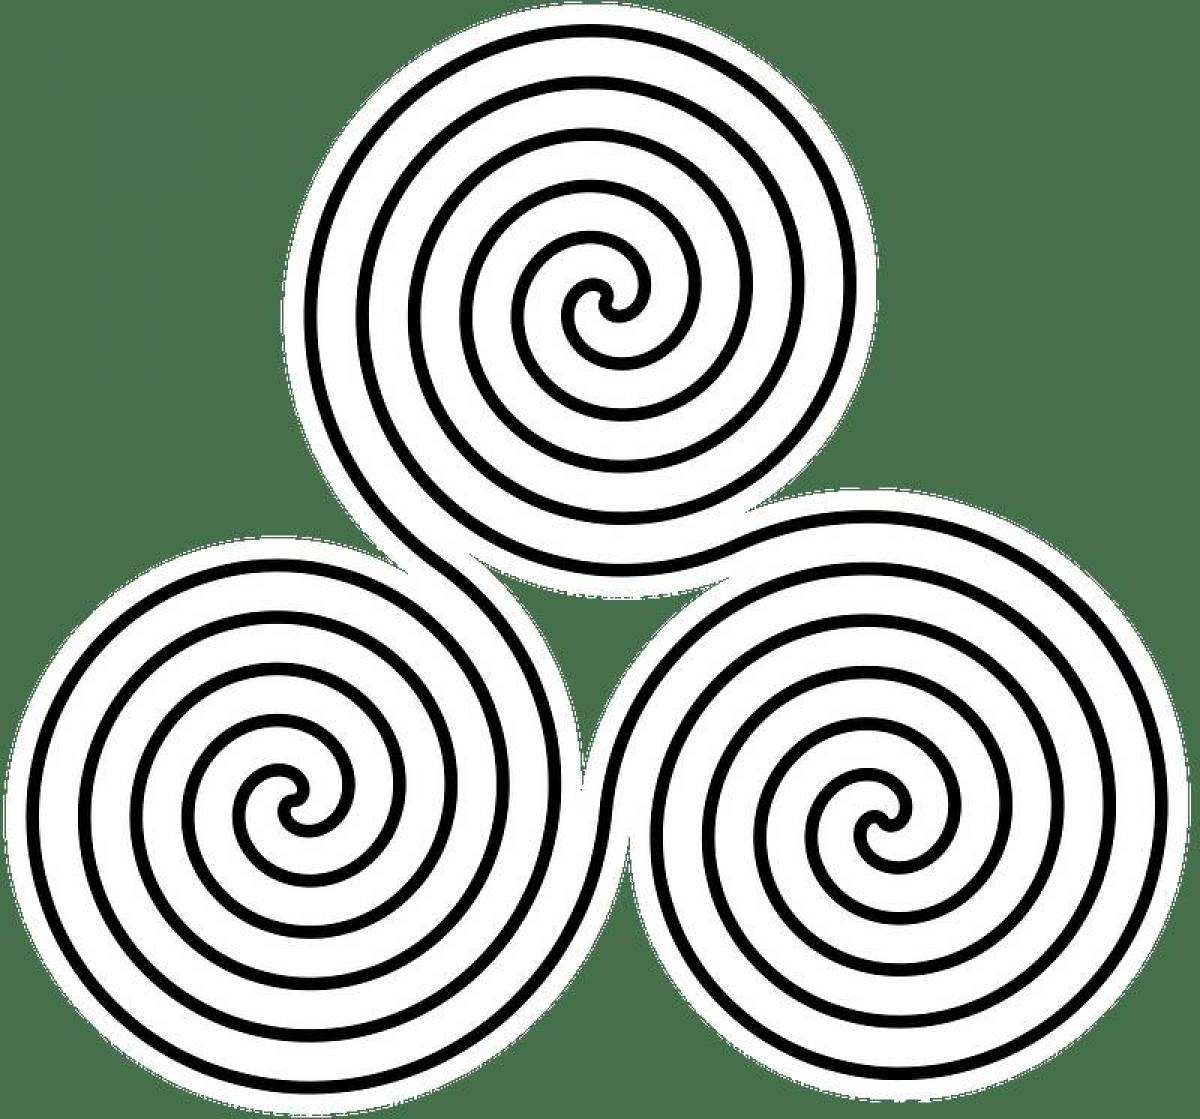 Coloring round glowing spiral